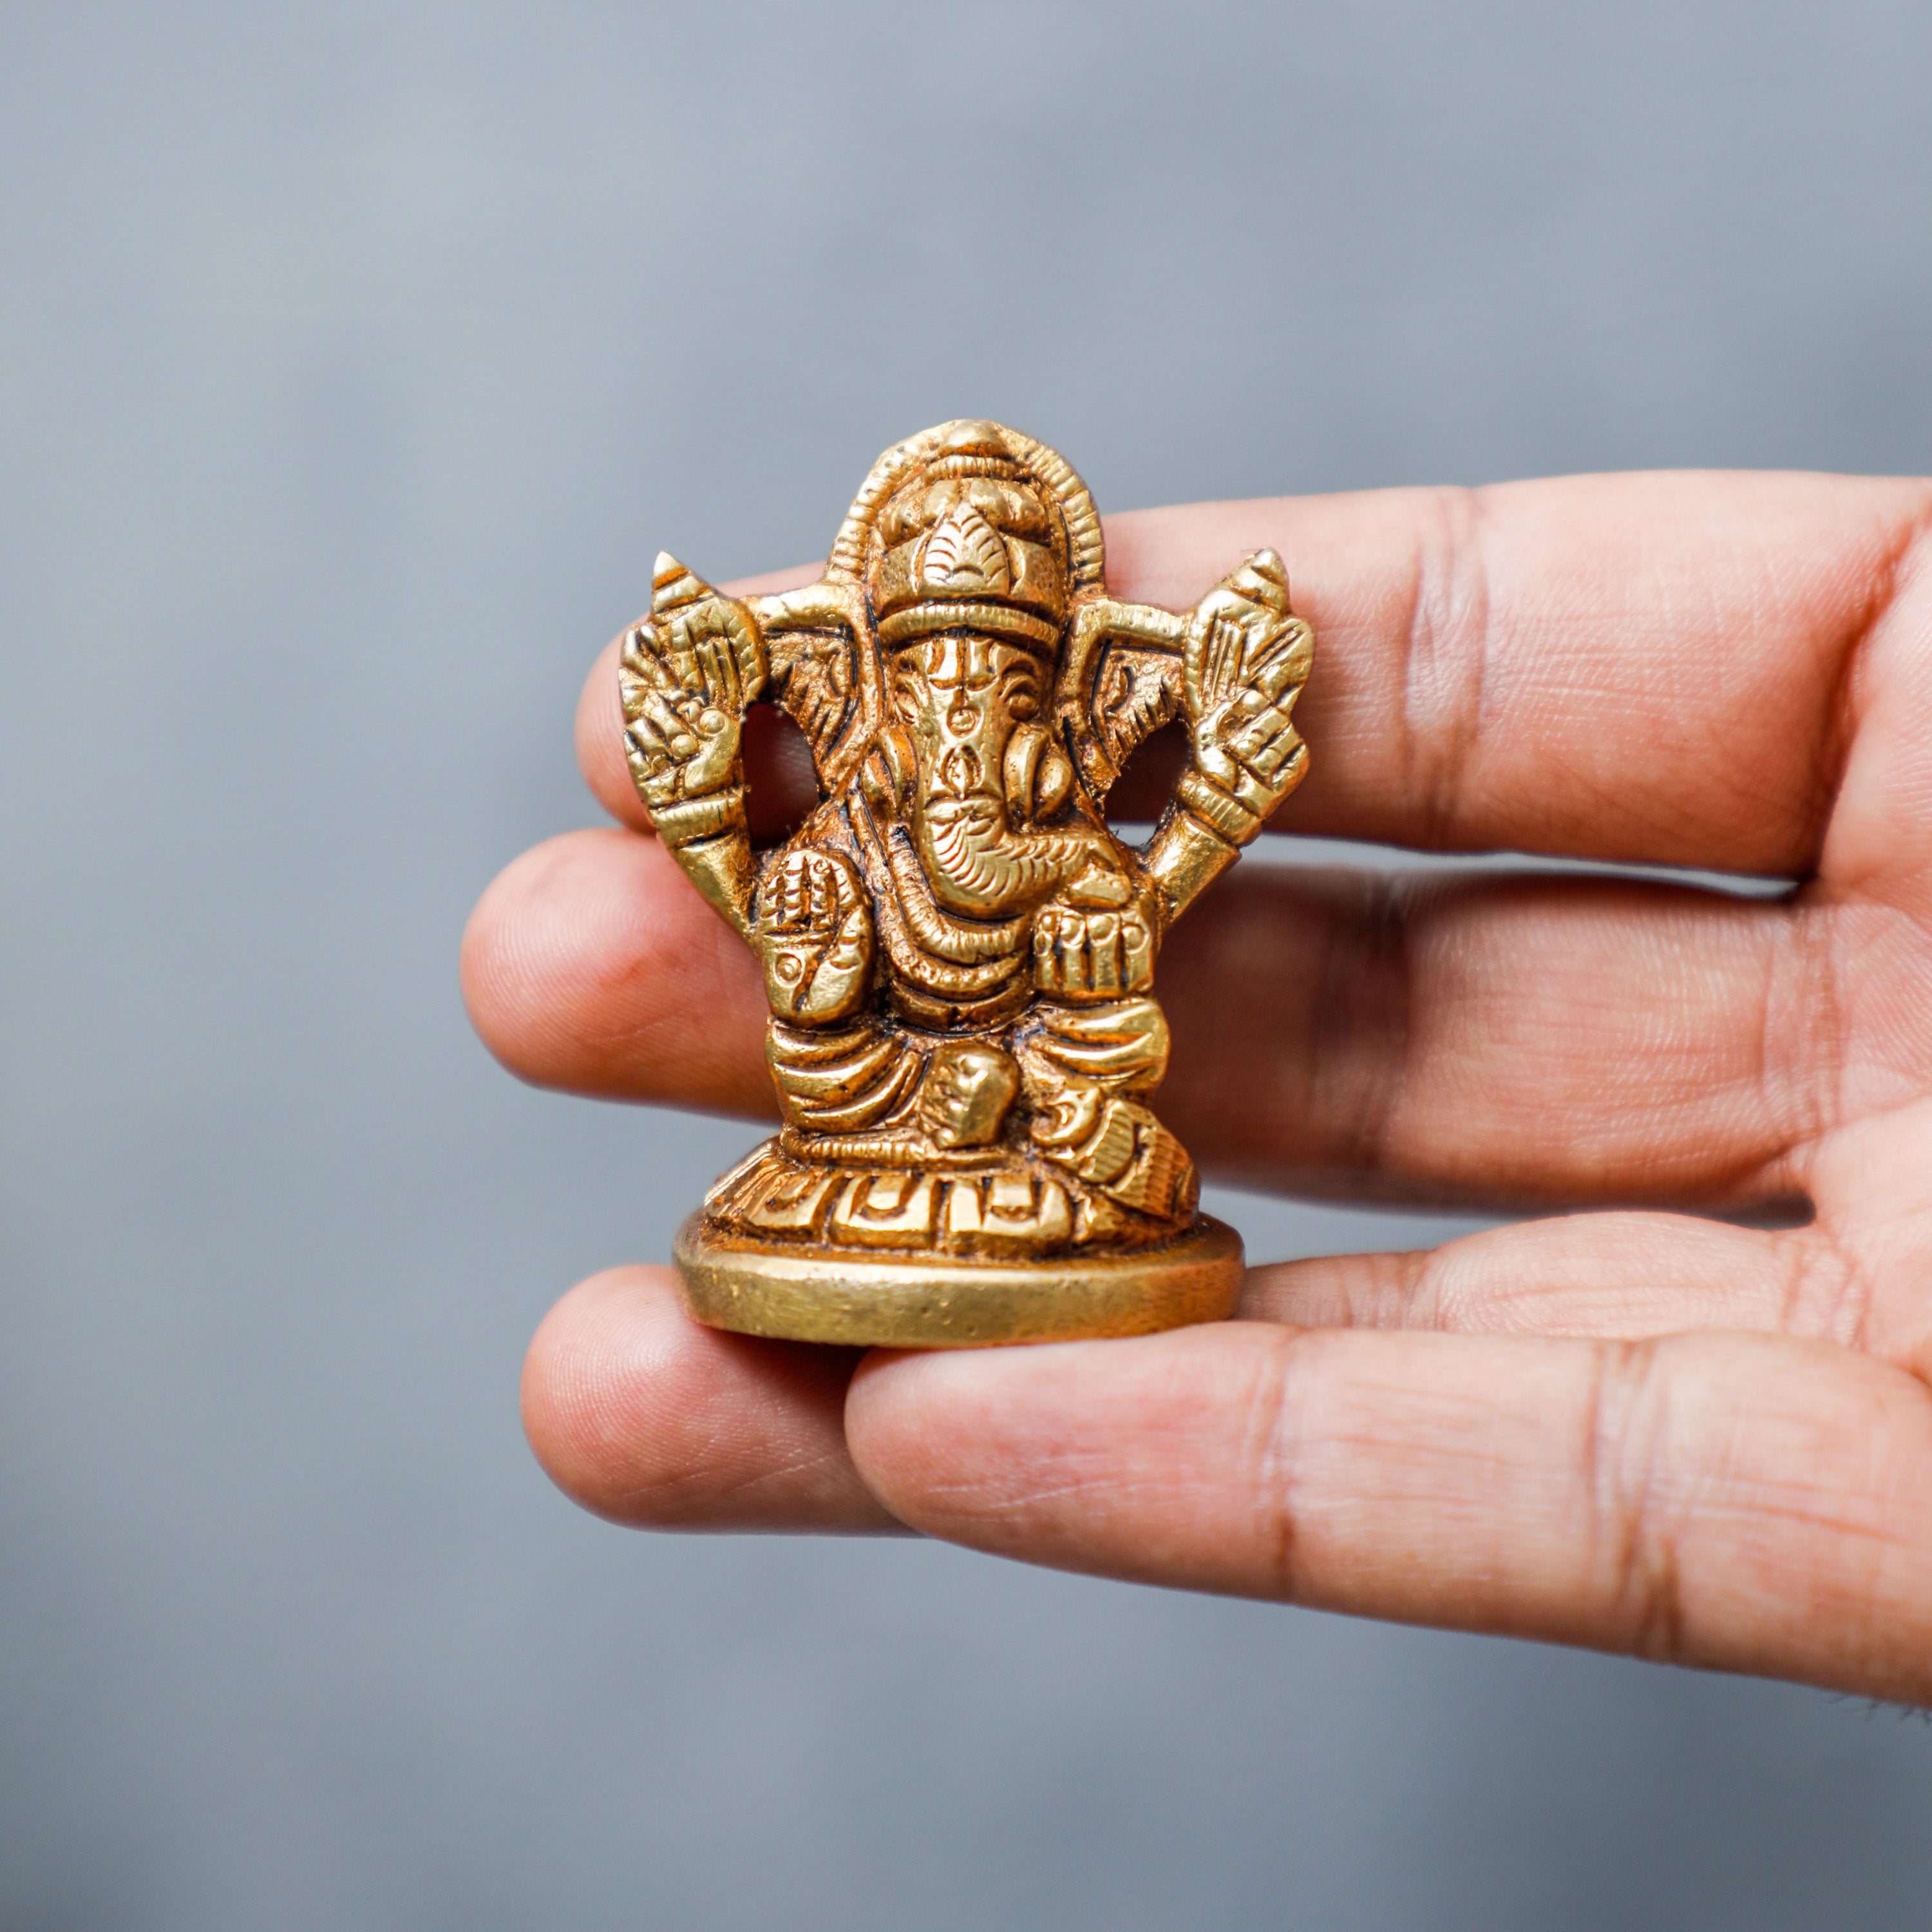 Bring home our Handcrafted Brass Ganapati idols